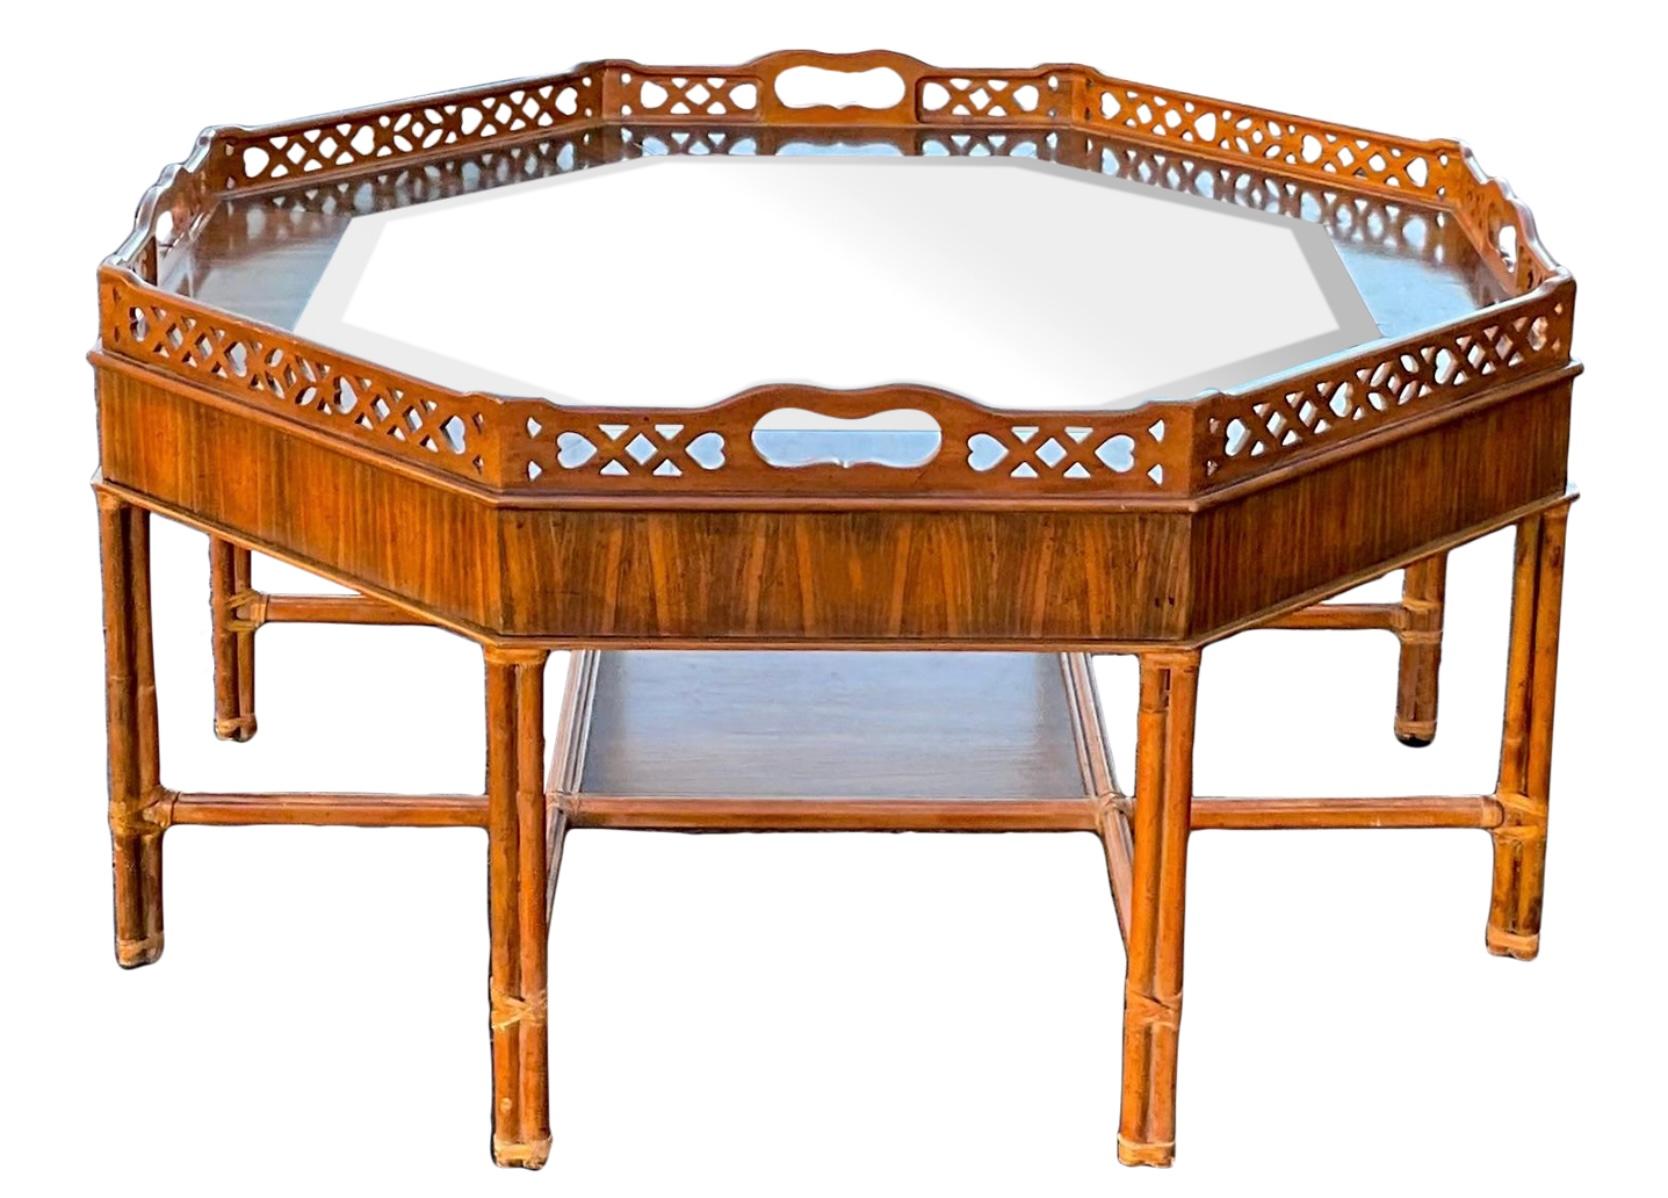 Glass Maitland-Smith Chippendale Style Coffee Table With Fretwork And Rattan Base  For Sale